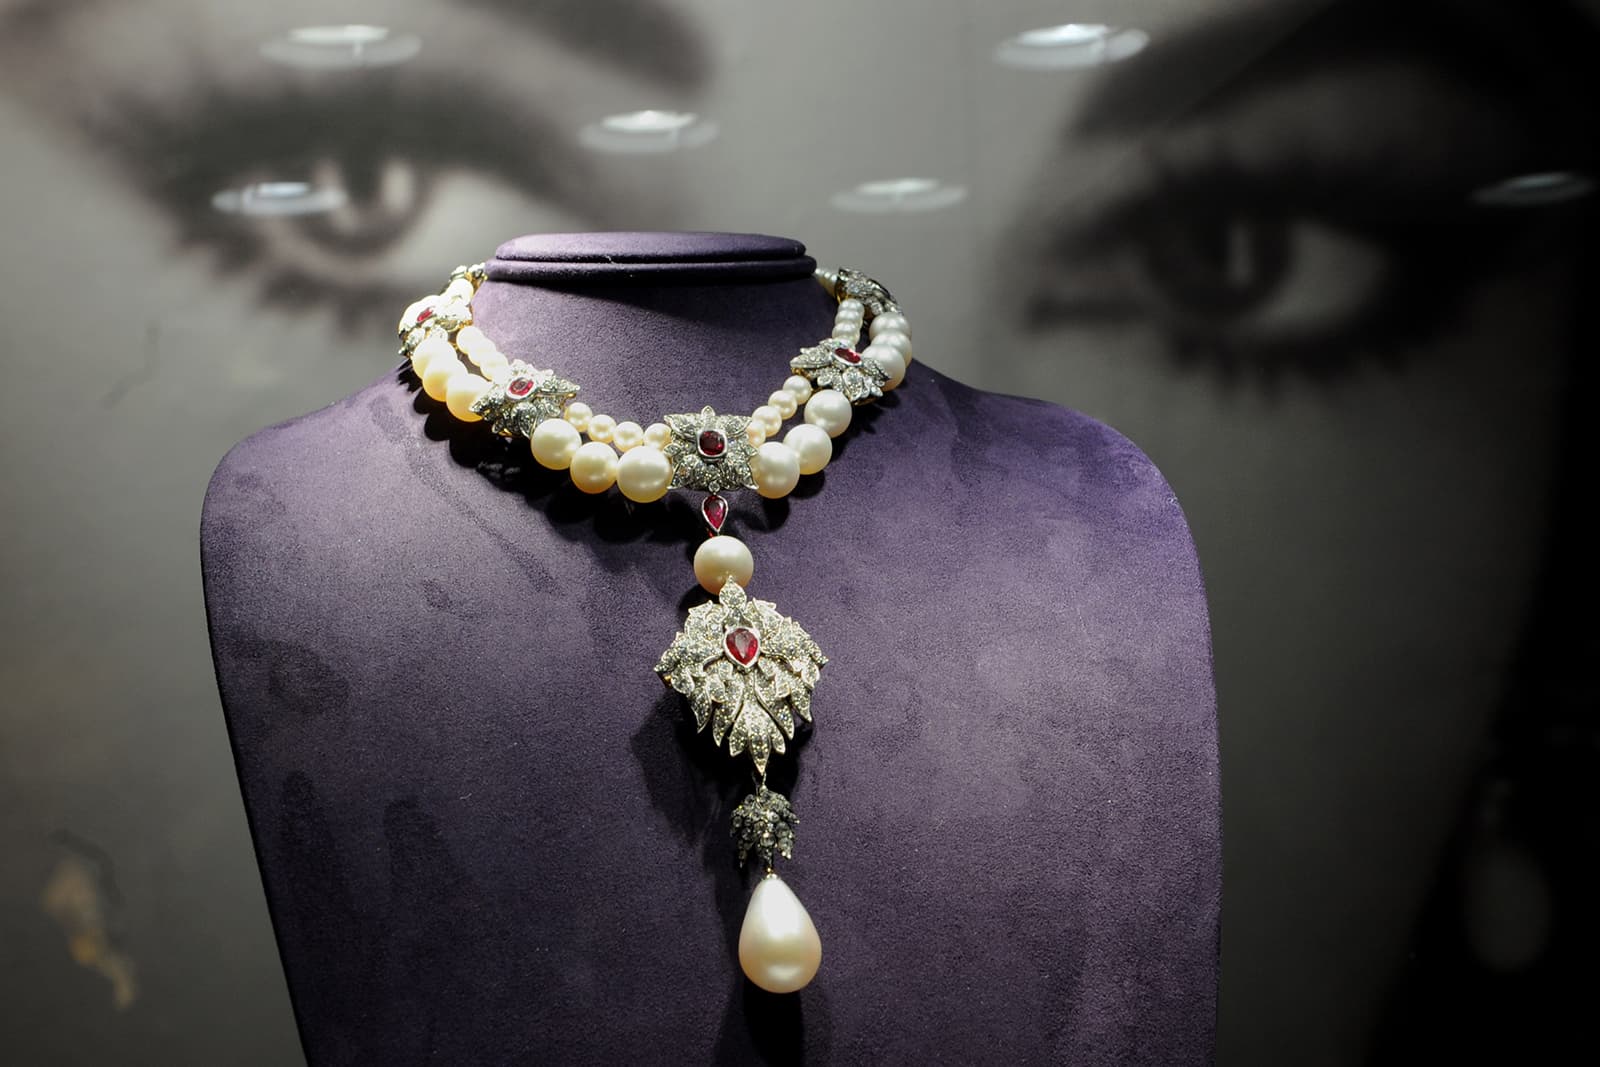 Elizabeth Taylor's La Peregrina Pearl necklace by Cartier with 55.95ct pear shaped pearl, accenting pearls, diamonds, and rubies